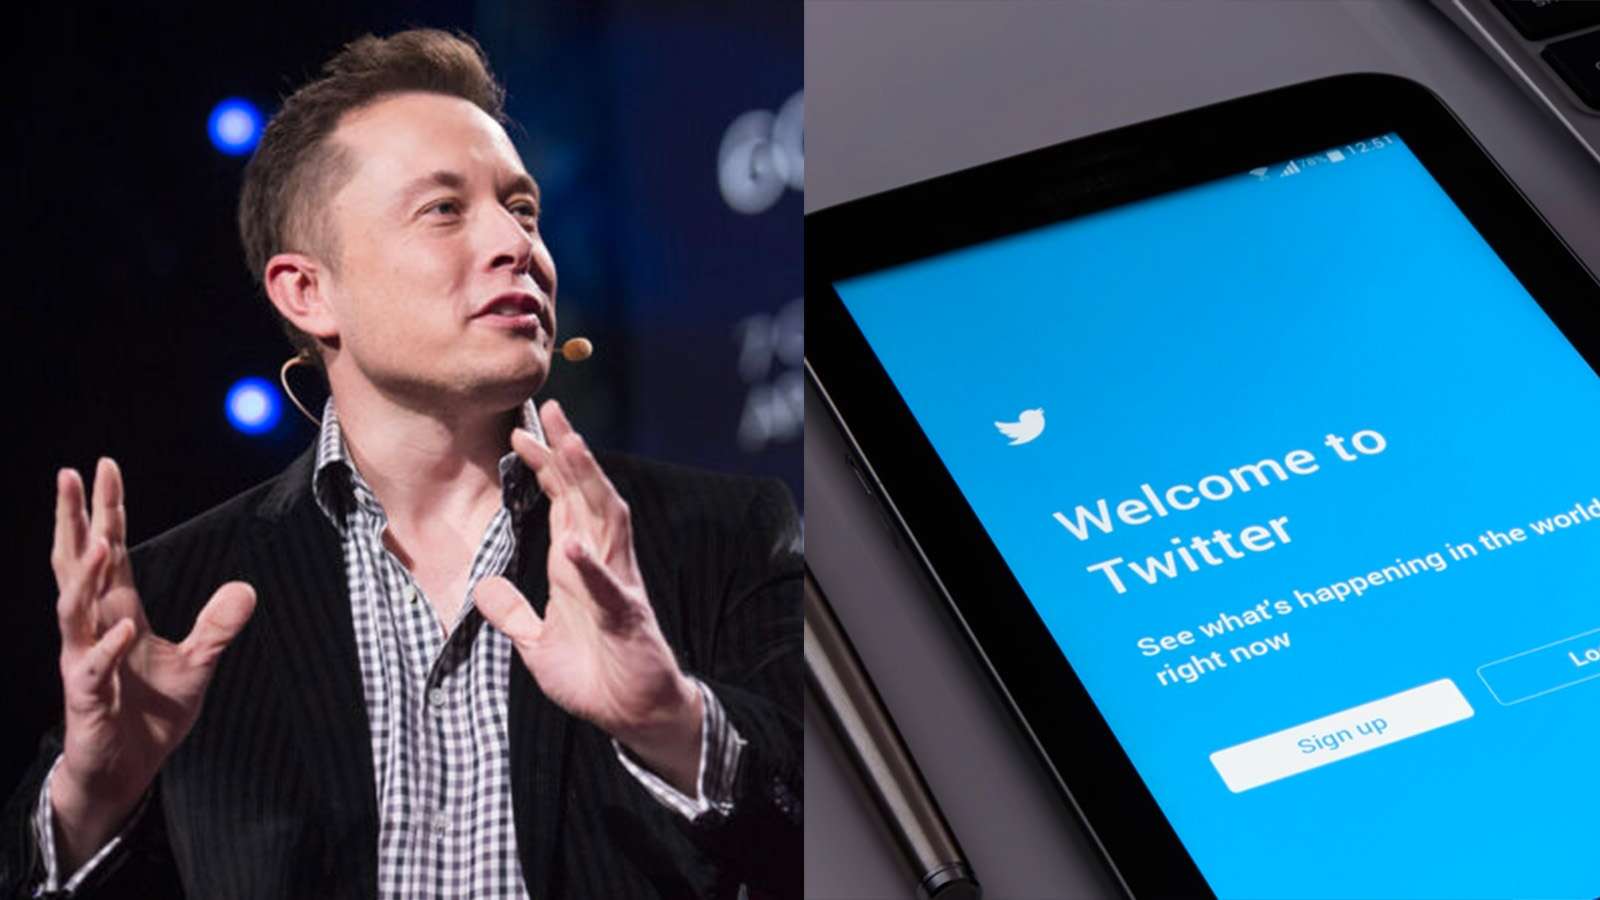 Elon Musk speaking next to Twitter on a phone